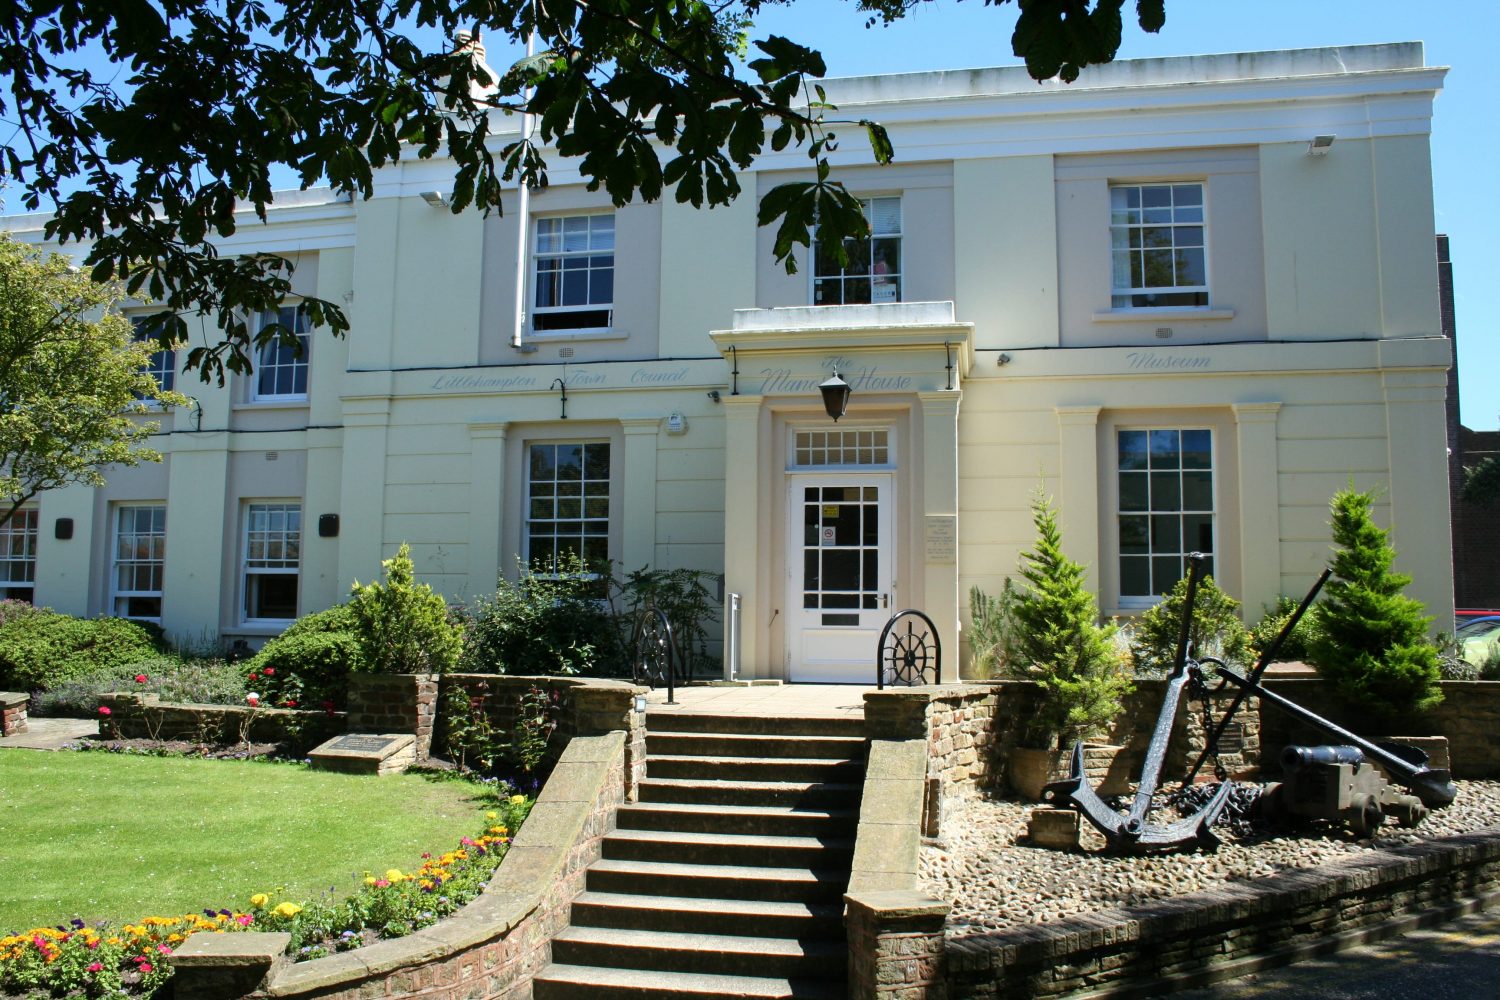 The front of Littlehampton Museum, Manor House